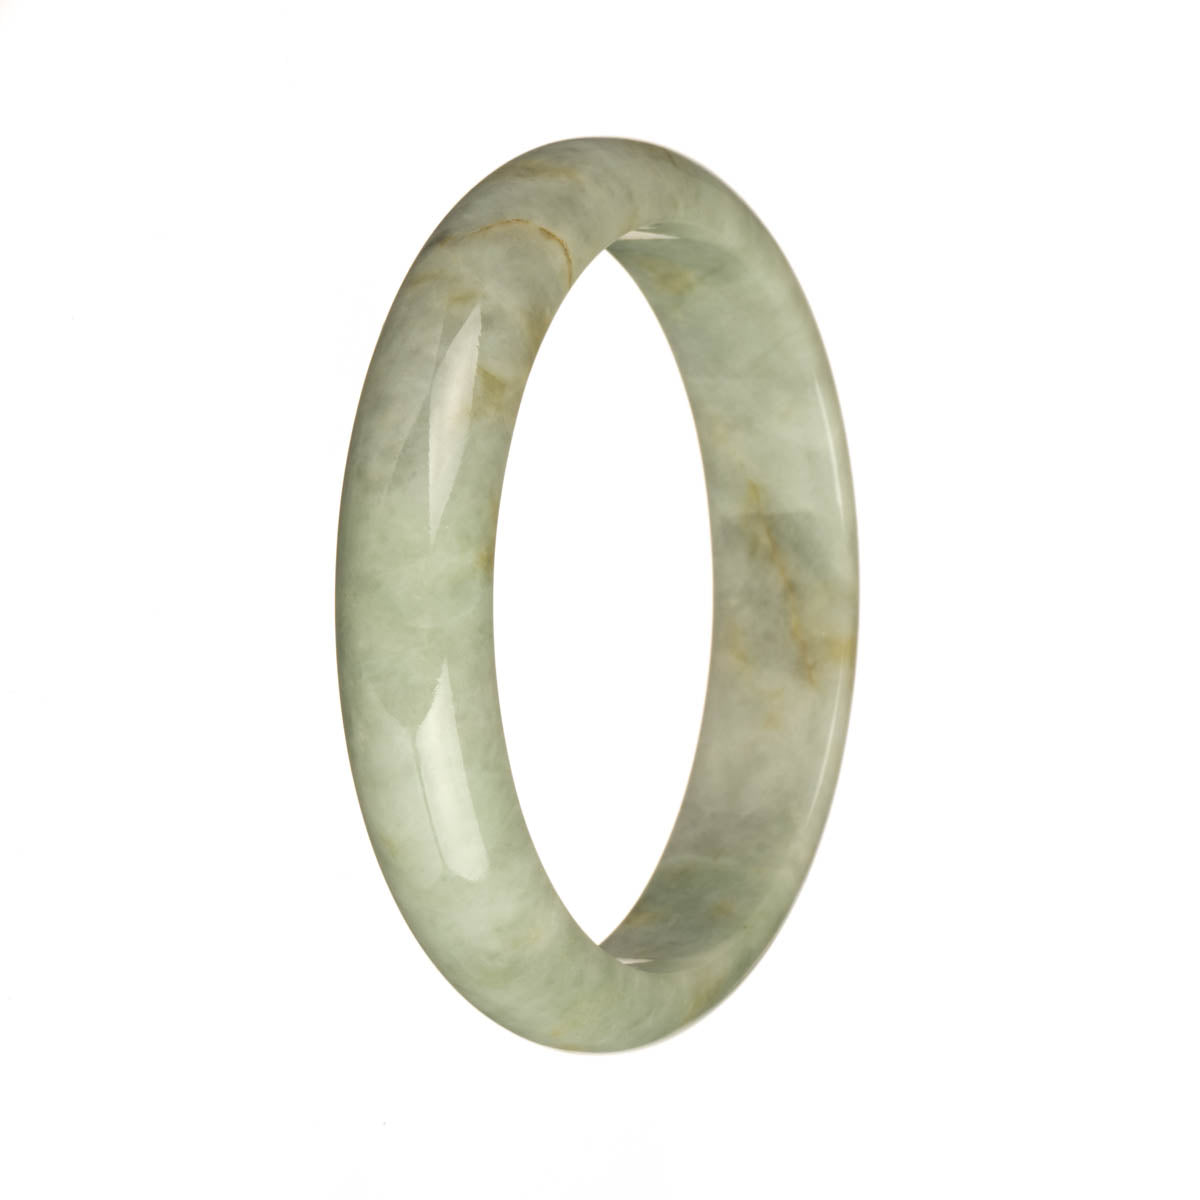 Close-up of a beautiful Burmese jade bracelet with a pale grey base color, featuring delicate pale green and brown patterns. The bracelet is carved in a half-moon shape and has a diameter of 59mm. Perfect for adding an elegant touch to any outfit.